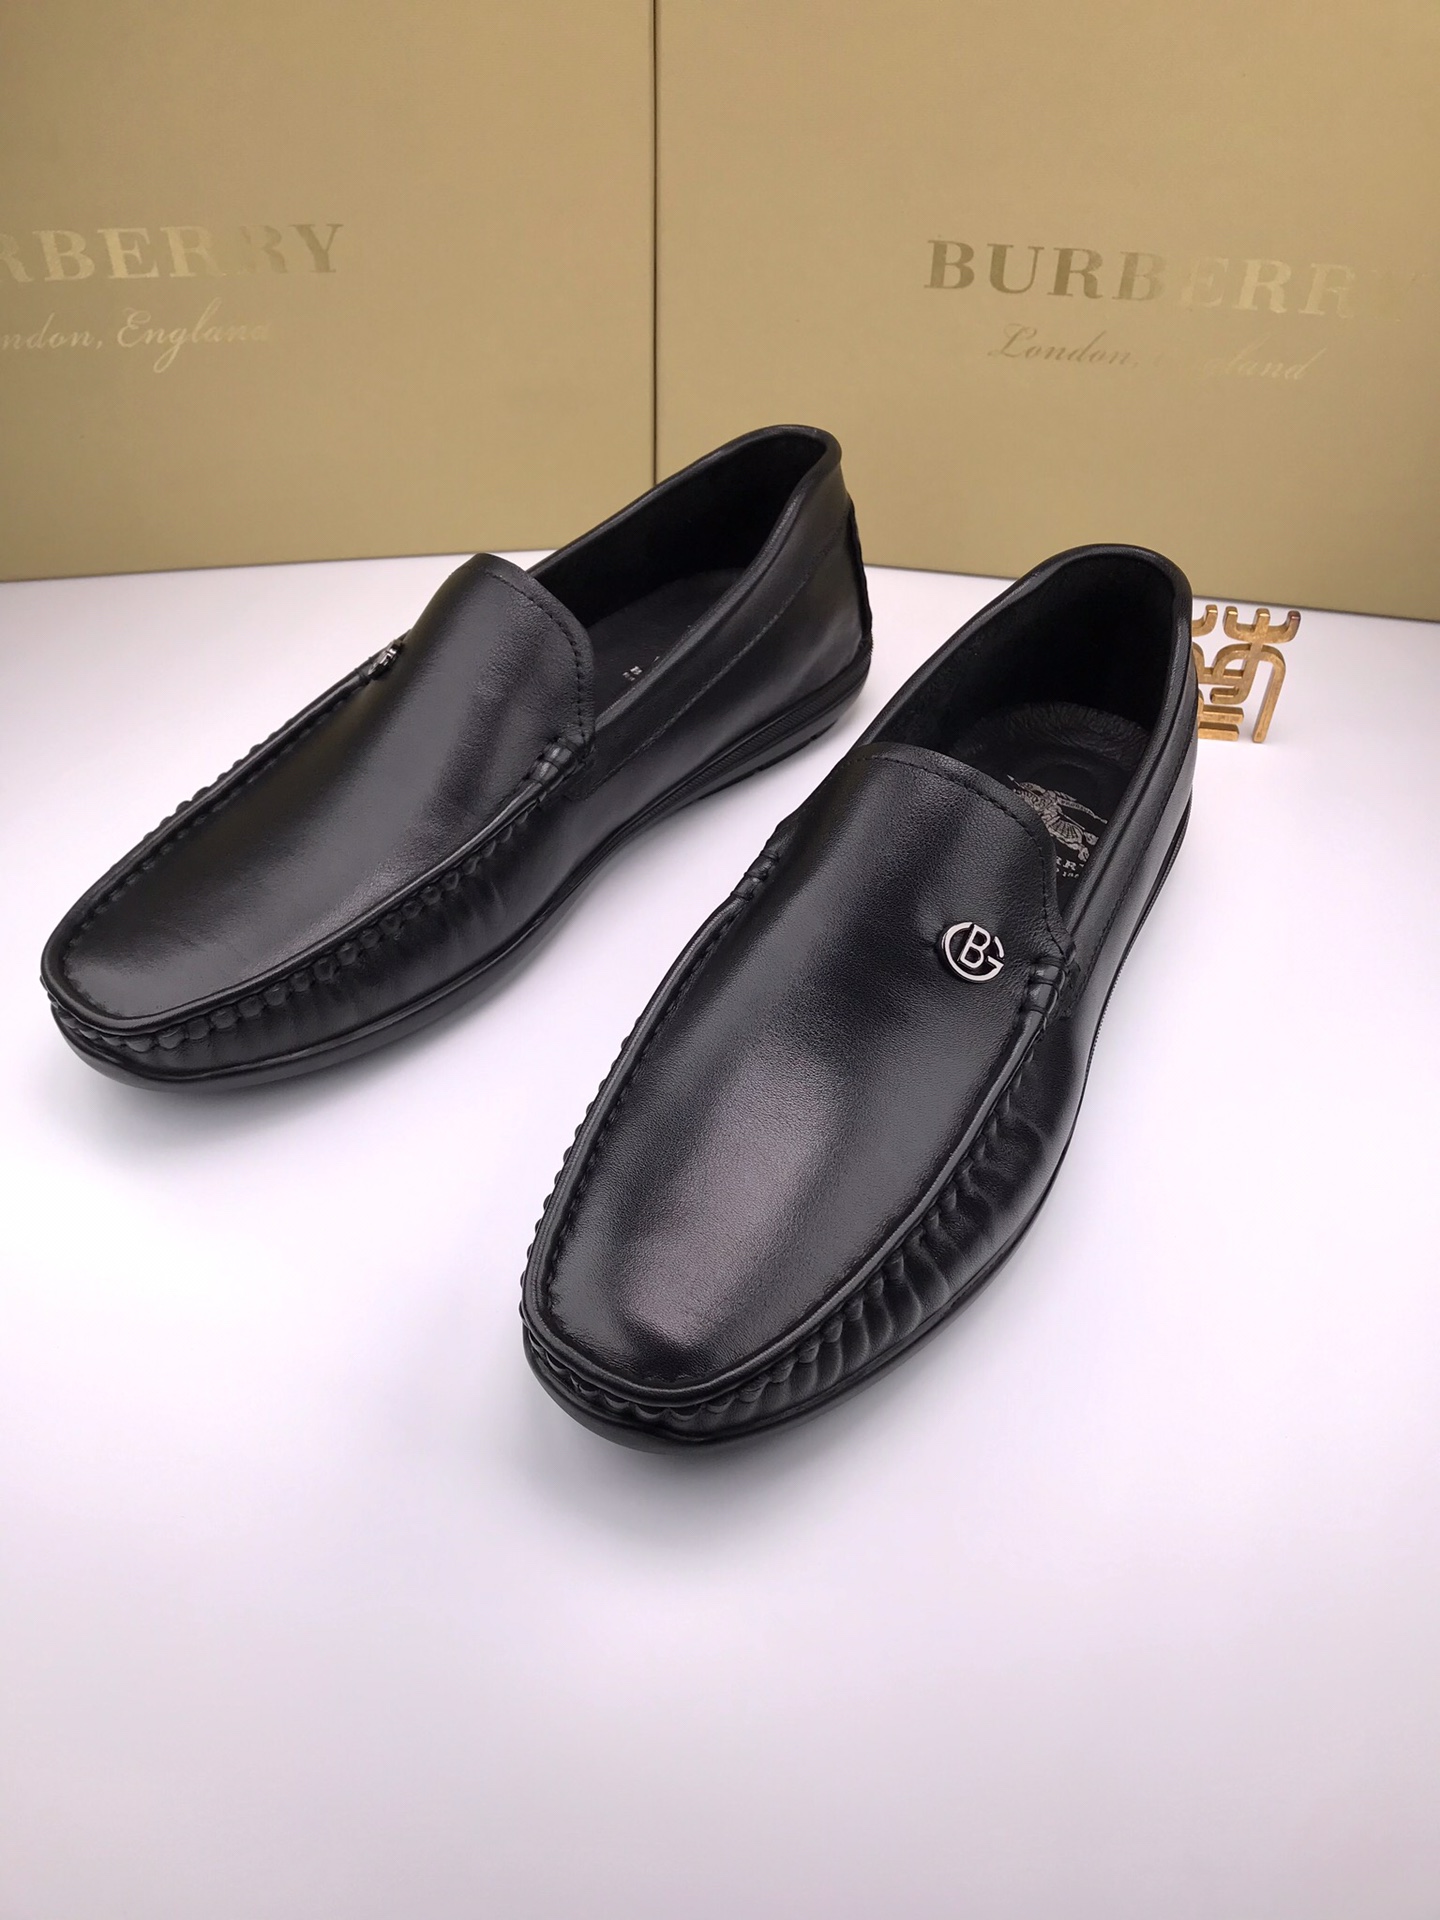 Burberry Shoes Moccasin Calfskin Cowhide Rubber Casual